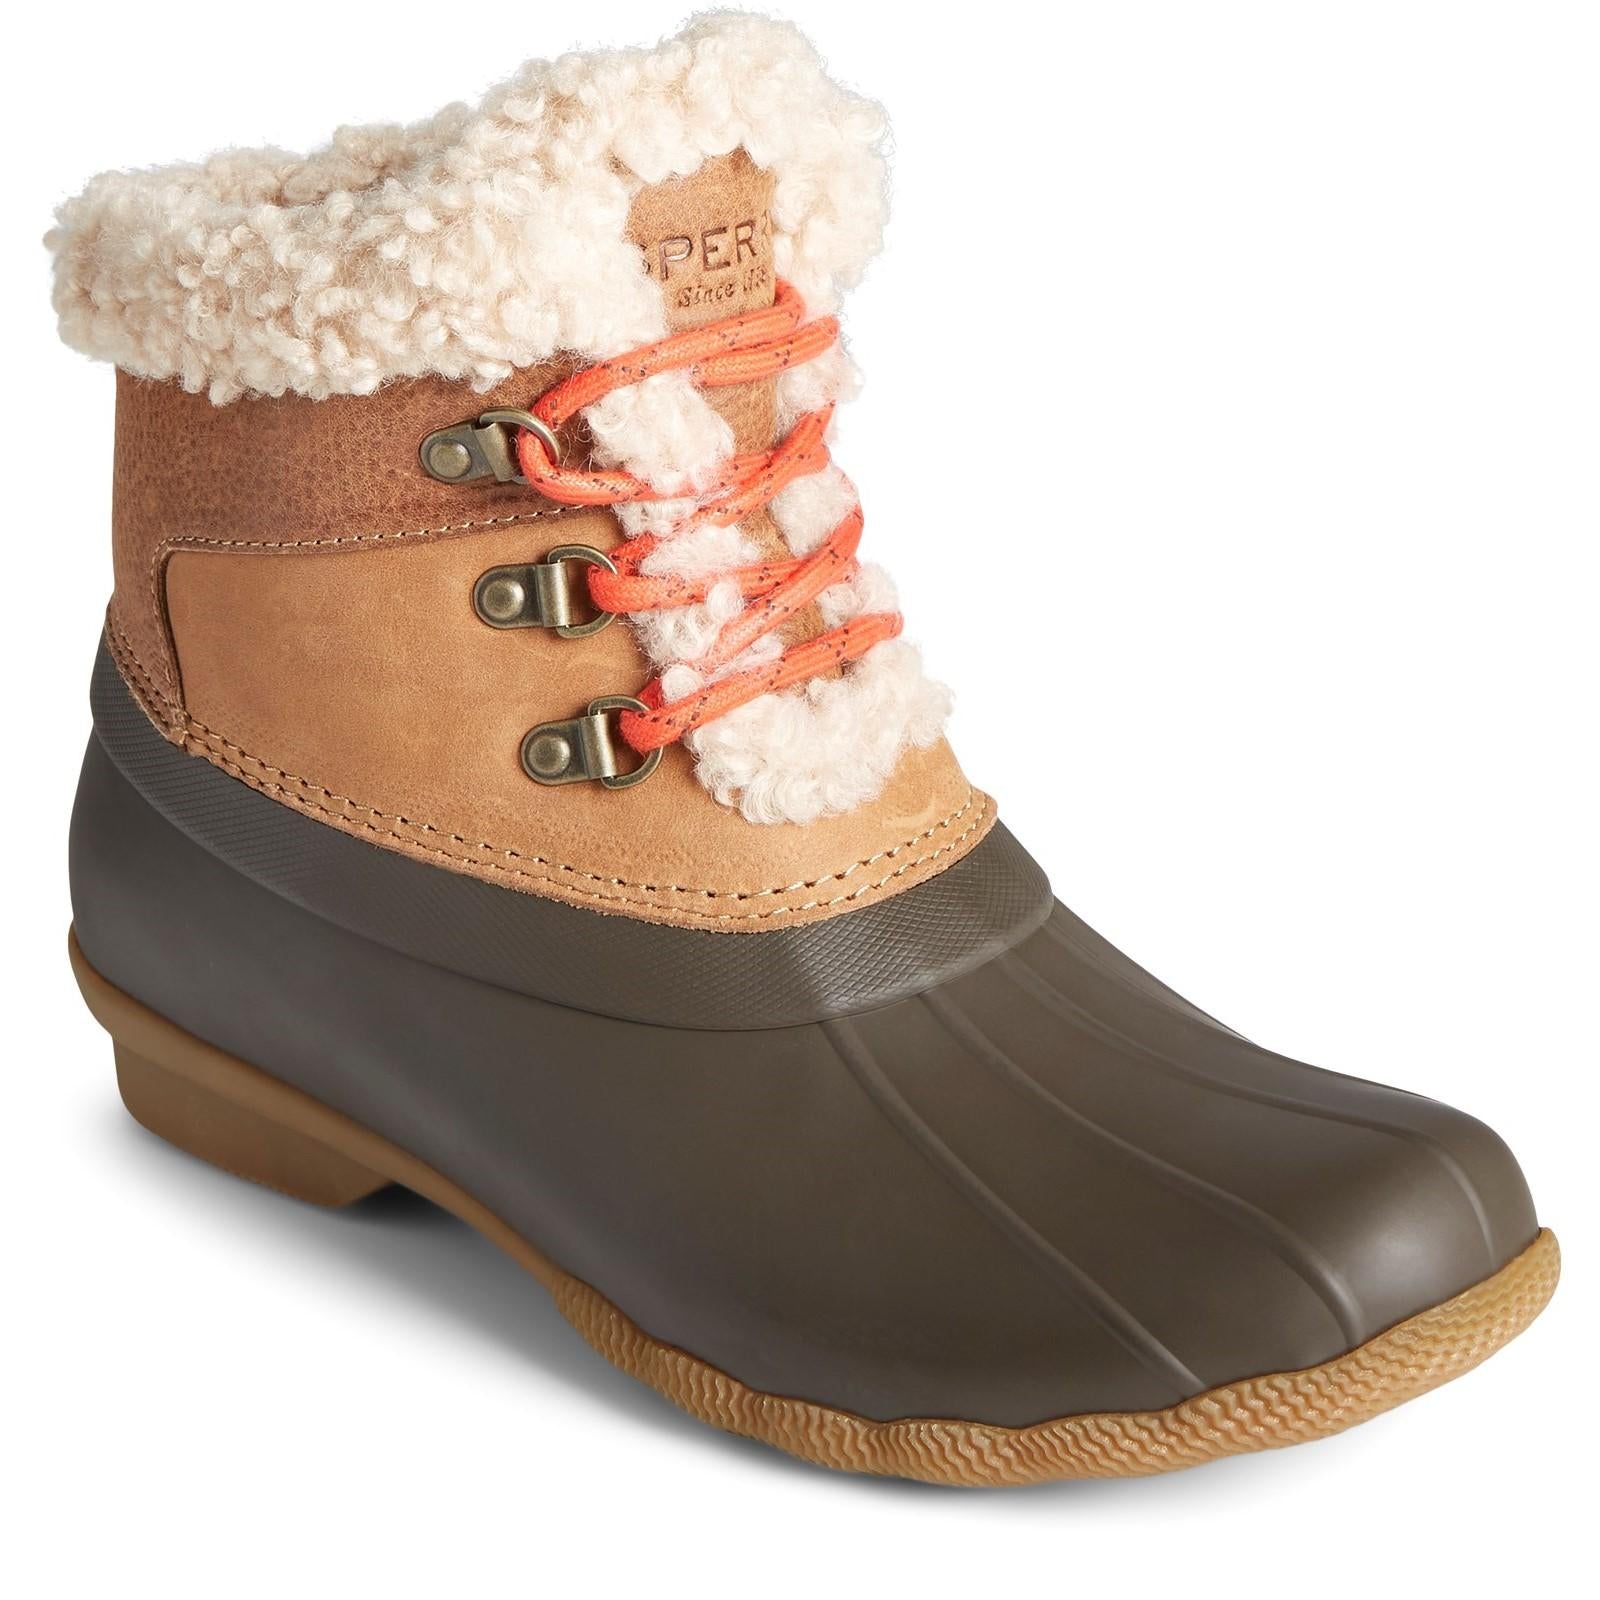 Sperry Saltwater Alpine Ankle Boot